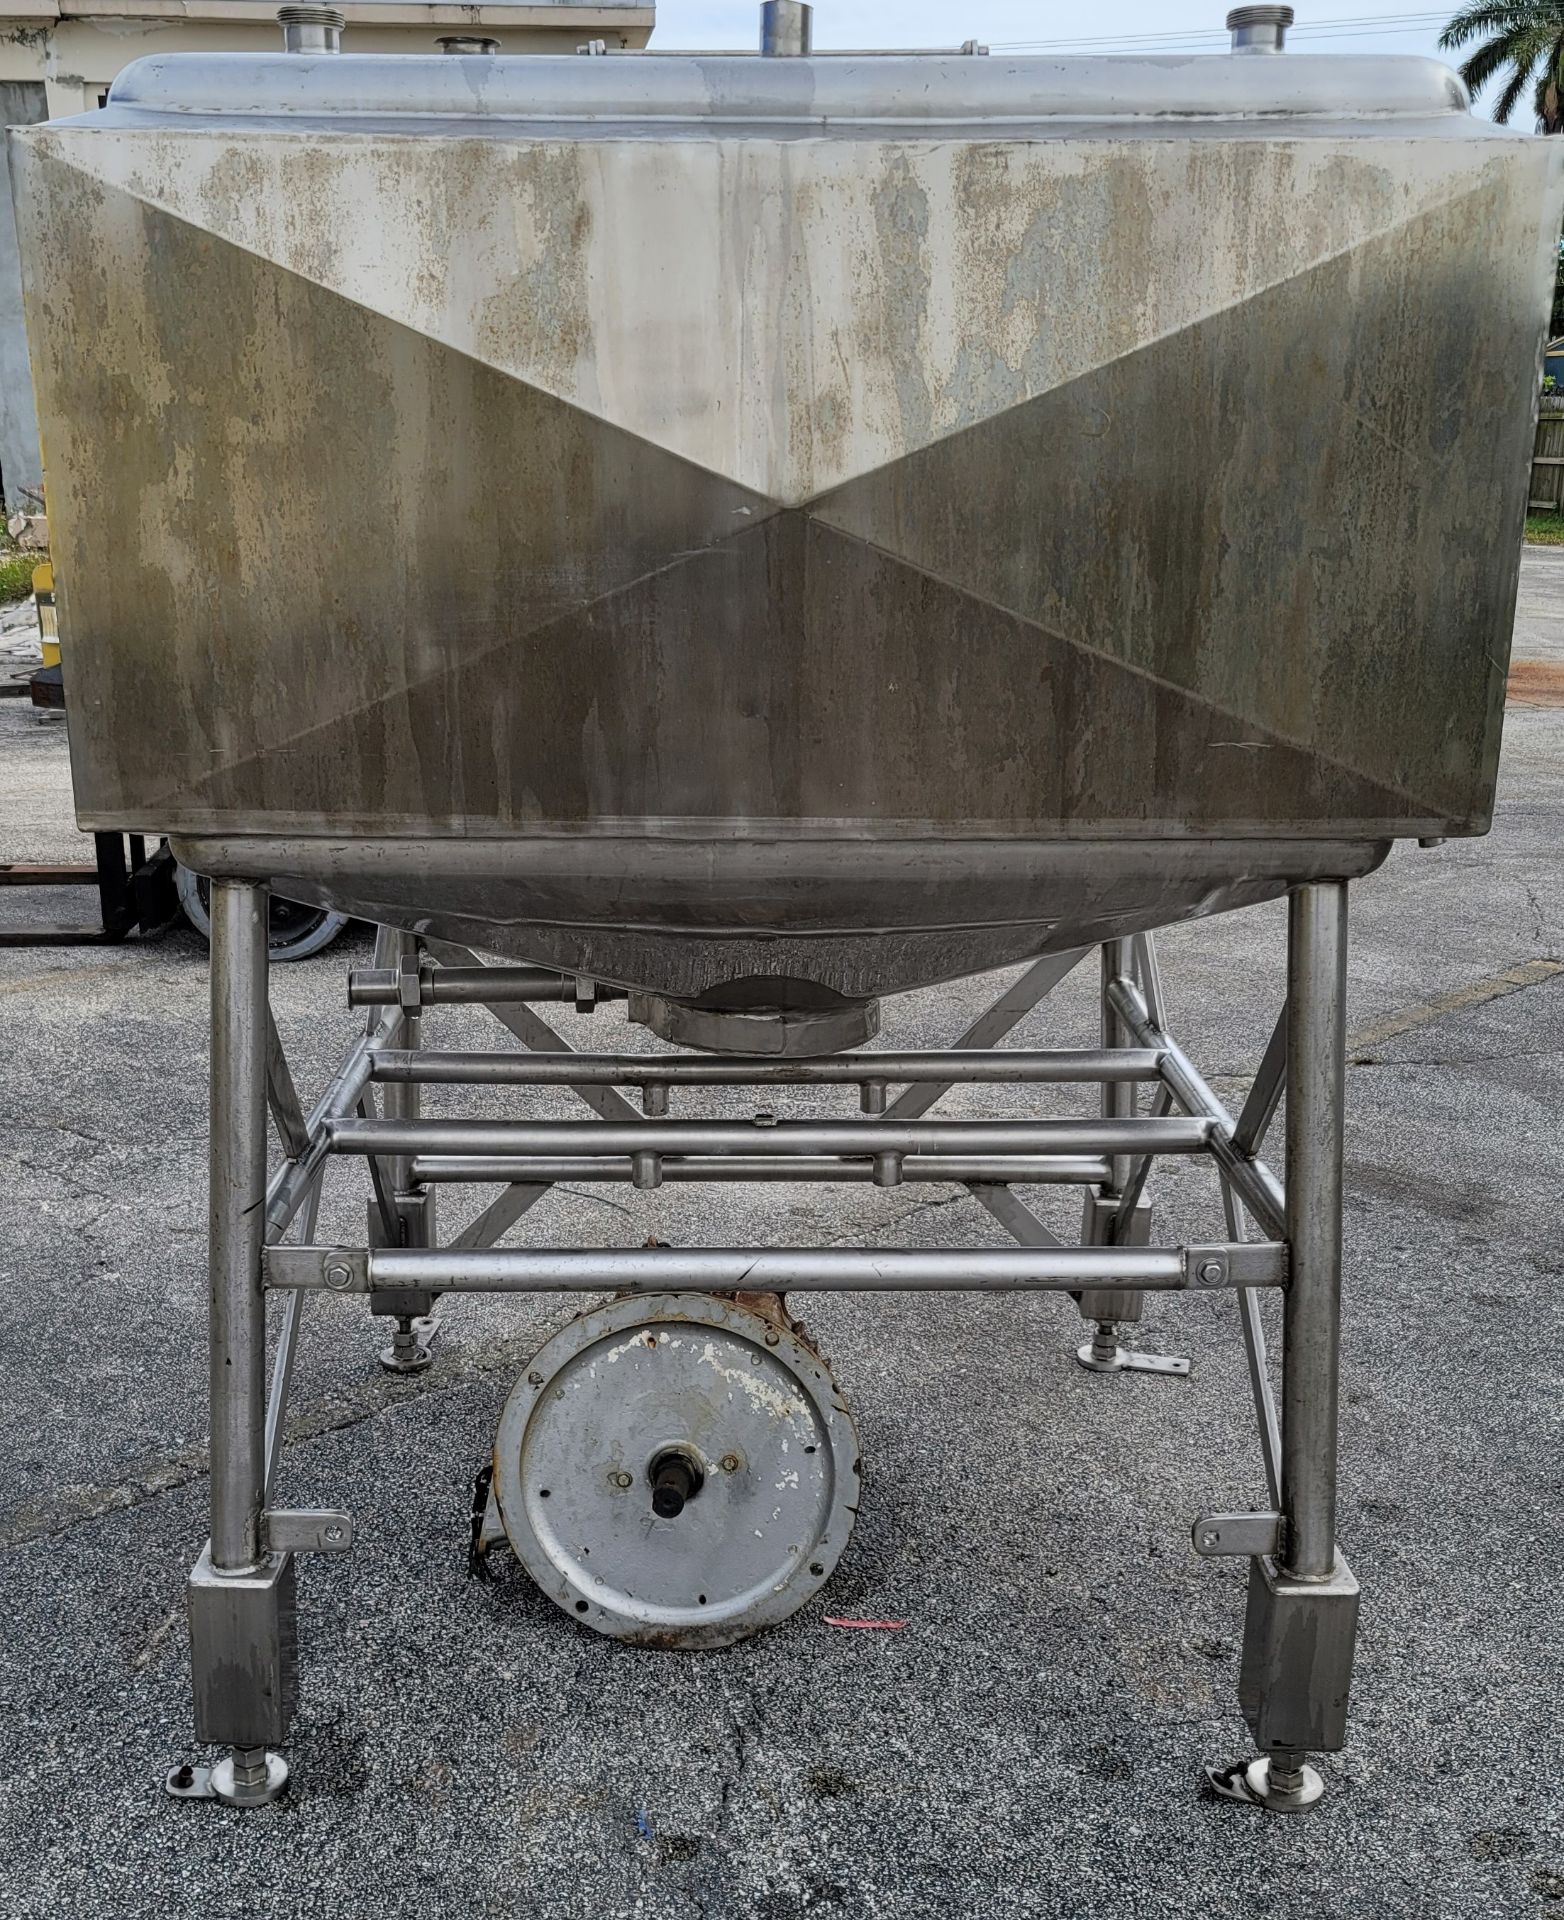 (Located in Belle Glade, FL) BREDDO 250GAL JACKETED LIQUIFIER, SERIAL: 05-591-AD, Rigging/Loading - Image 4 of 6